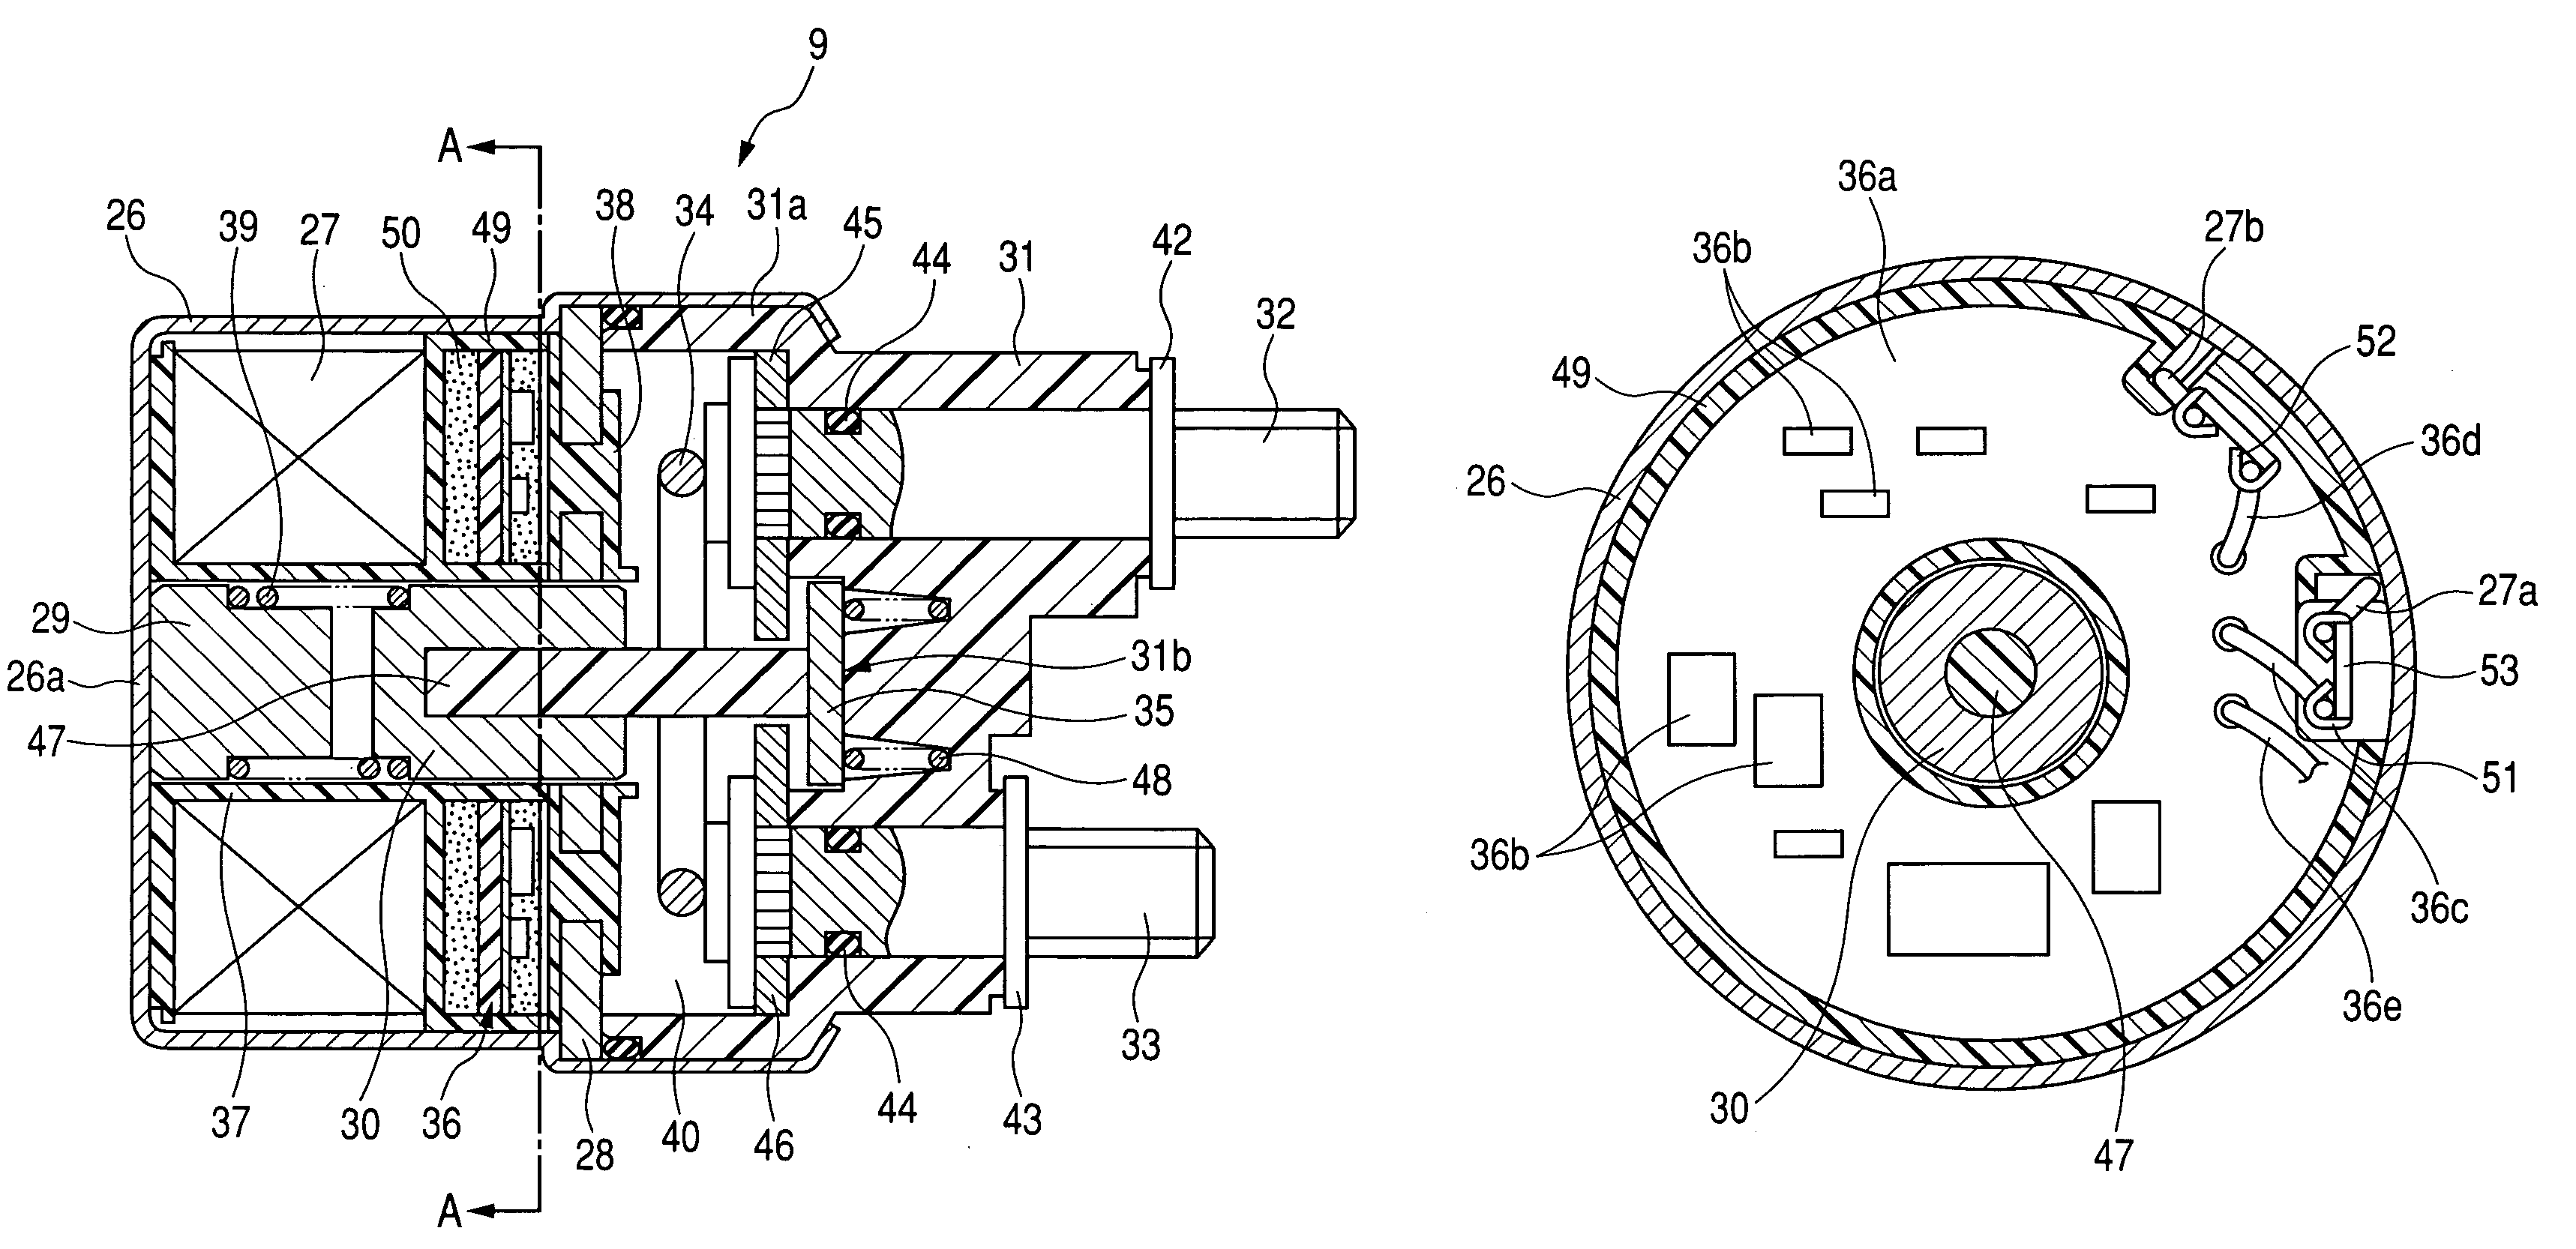 Electromagnetic switch equipped with built-in electronic control circuit